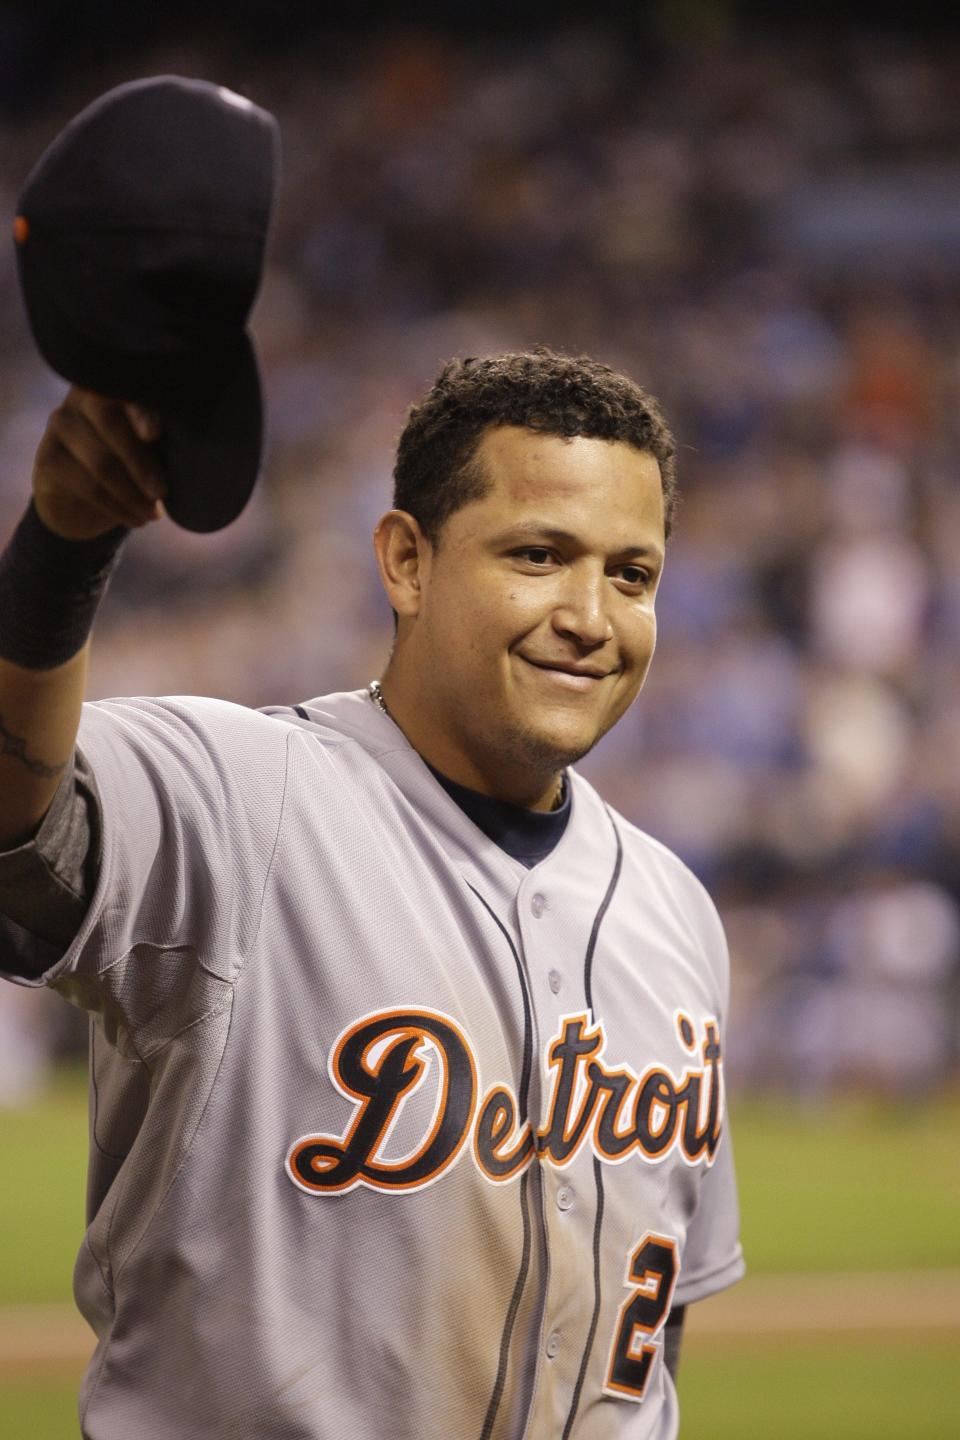 Detroit Tigers Miguel Cabrera waves his cap to the crowd after being taken out of the game in the fourth inning against the Kansas City Royals in Kansas City, Missouri, on Wednesday, October 3, 2012.